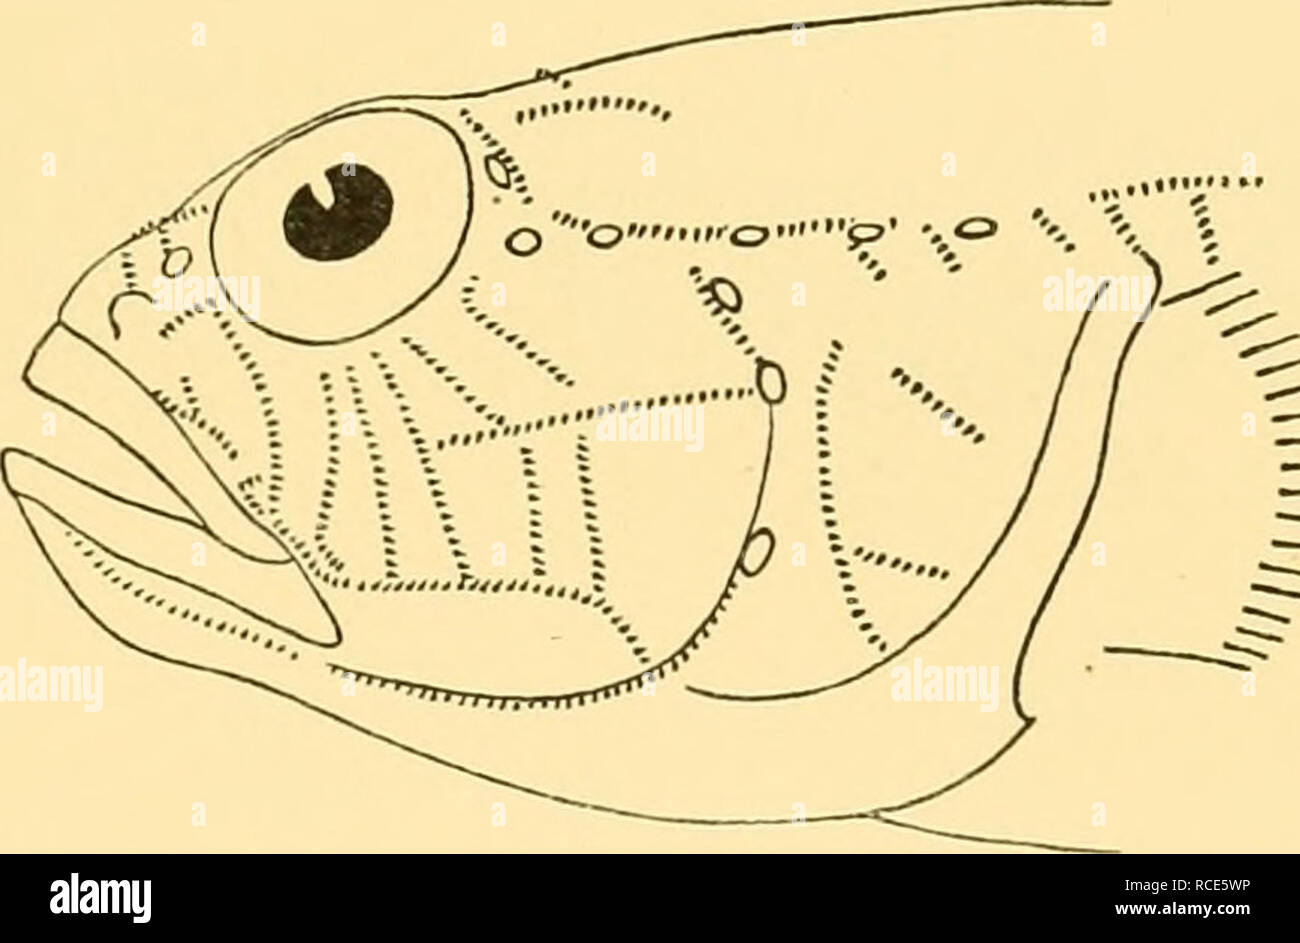 . Discovery reports. Discovery (Ship); Scientific expeditions; Ocean; Antarctica; Falkland Islands. Fig. 5. Gobius {Gobiiis) angolensis. Holotype. Ixi.. Fig. 6. Diagrammatic view of head of Gobius (Gobius) angolensis, showing the arrangement of the series of cutaneous papillae. Gobius, sp. St. 283. 13. viii. 27. Off Annobon, Gulf of Guinea. Large dredge, 18-30 m.: 2 specimens, 17, 18 mm. Acentrogobius koumansi, sp.n. St. 274. 4. viii. 27. Off St Paul de Loanda, Angola. Large otter trawl, 64-65 m.: 44 specimens, 30-100 mm. (holotype, 100 mm.). St. 279. 10. viii. 27. Off Cape Lopez, French Congo Stock Photo